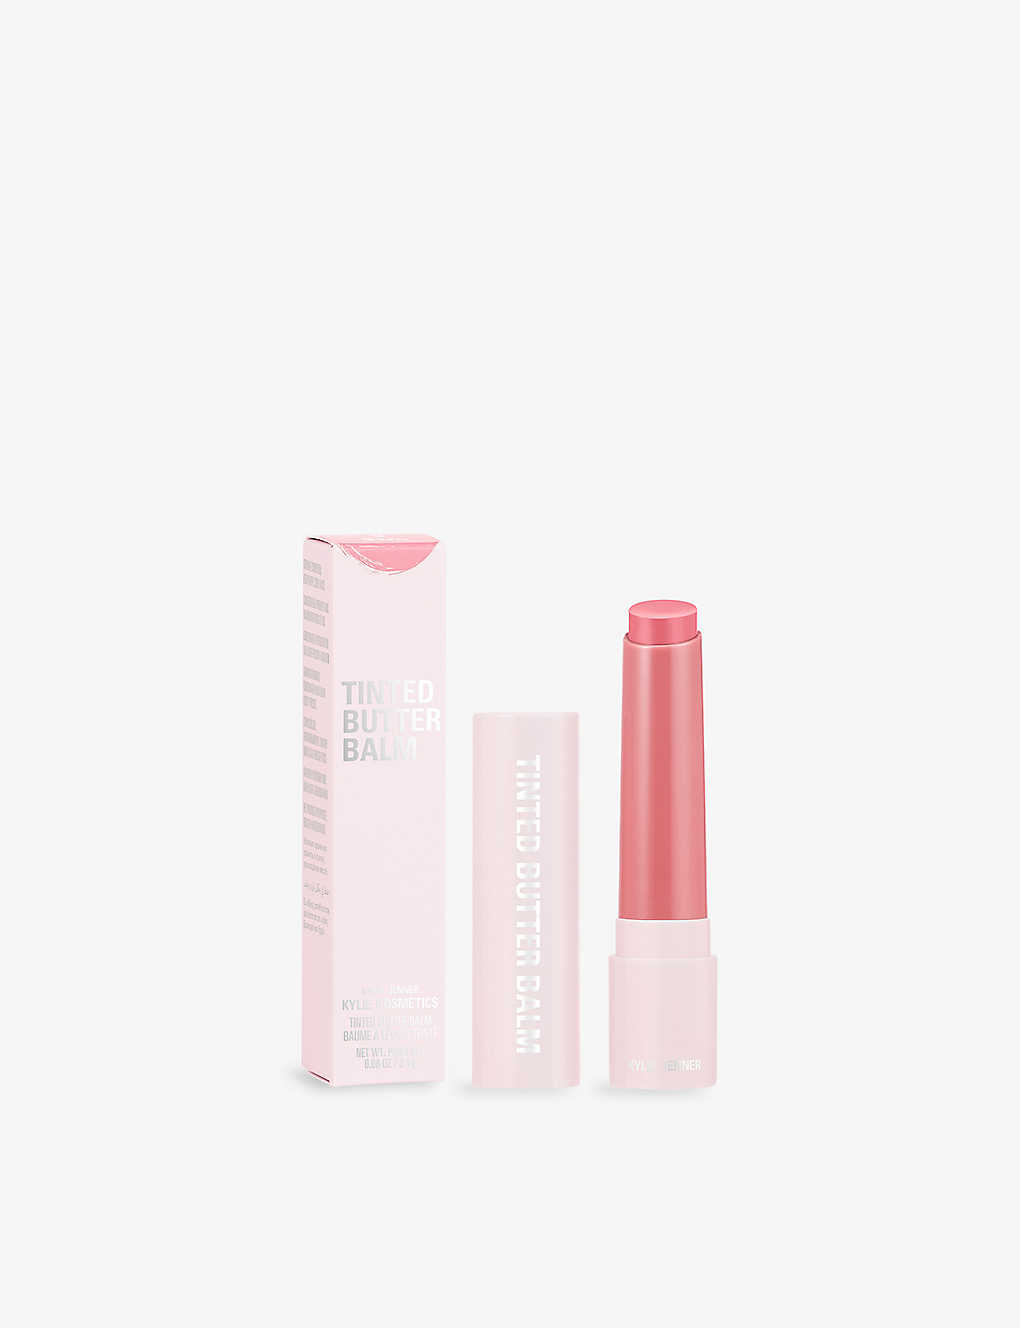 Kylie By Kylie Jenner Pink Me Up At 8 Tinted Butter Balm 2.4g